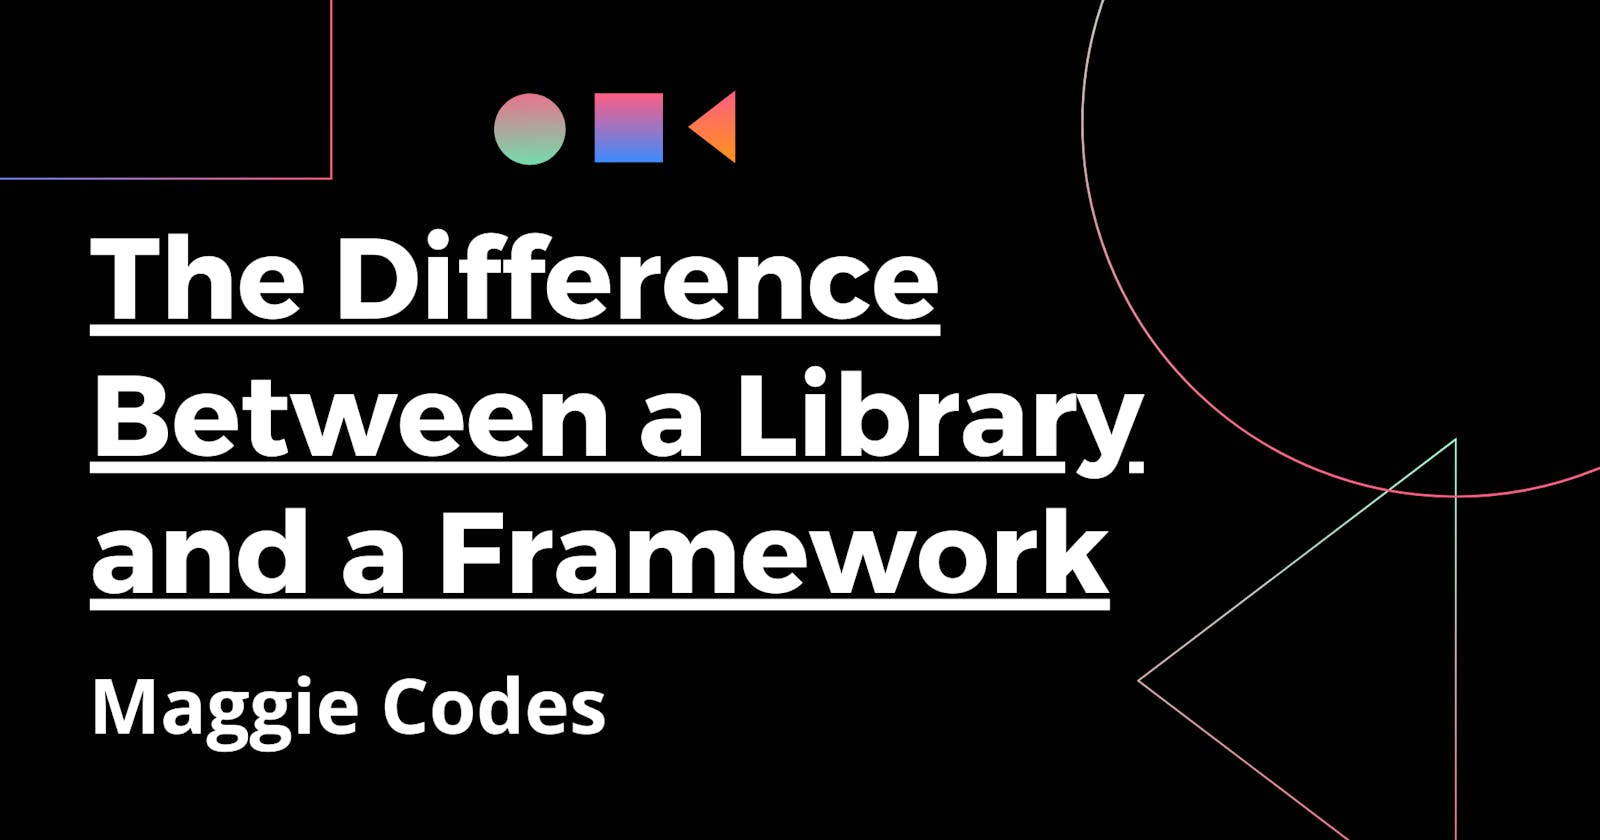 The Difference Between a Library and a Framework